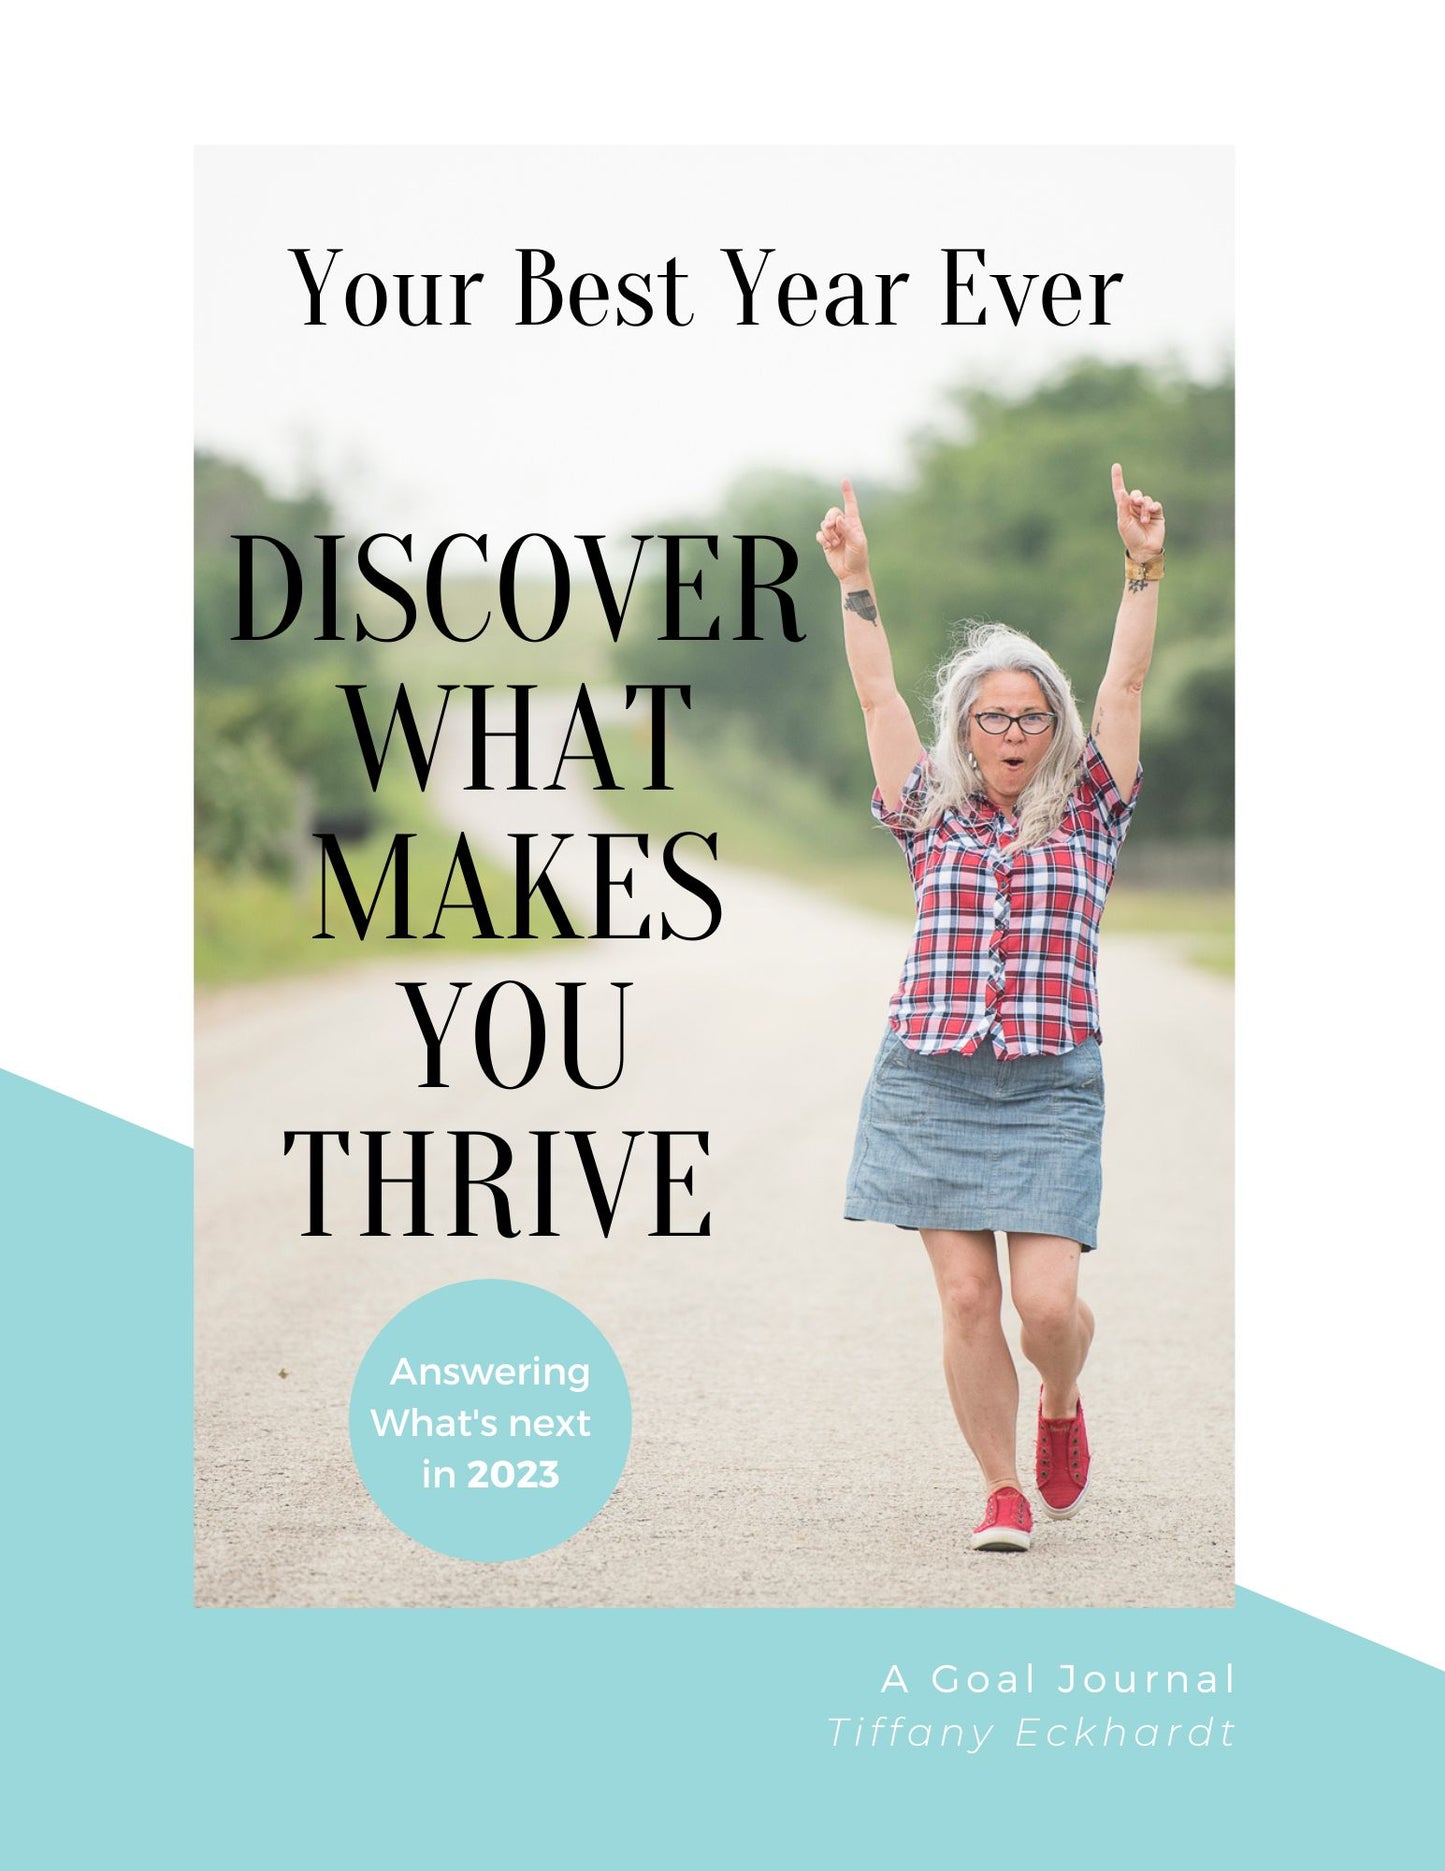 Your Best Year Ever E-Journal